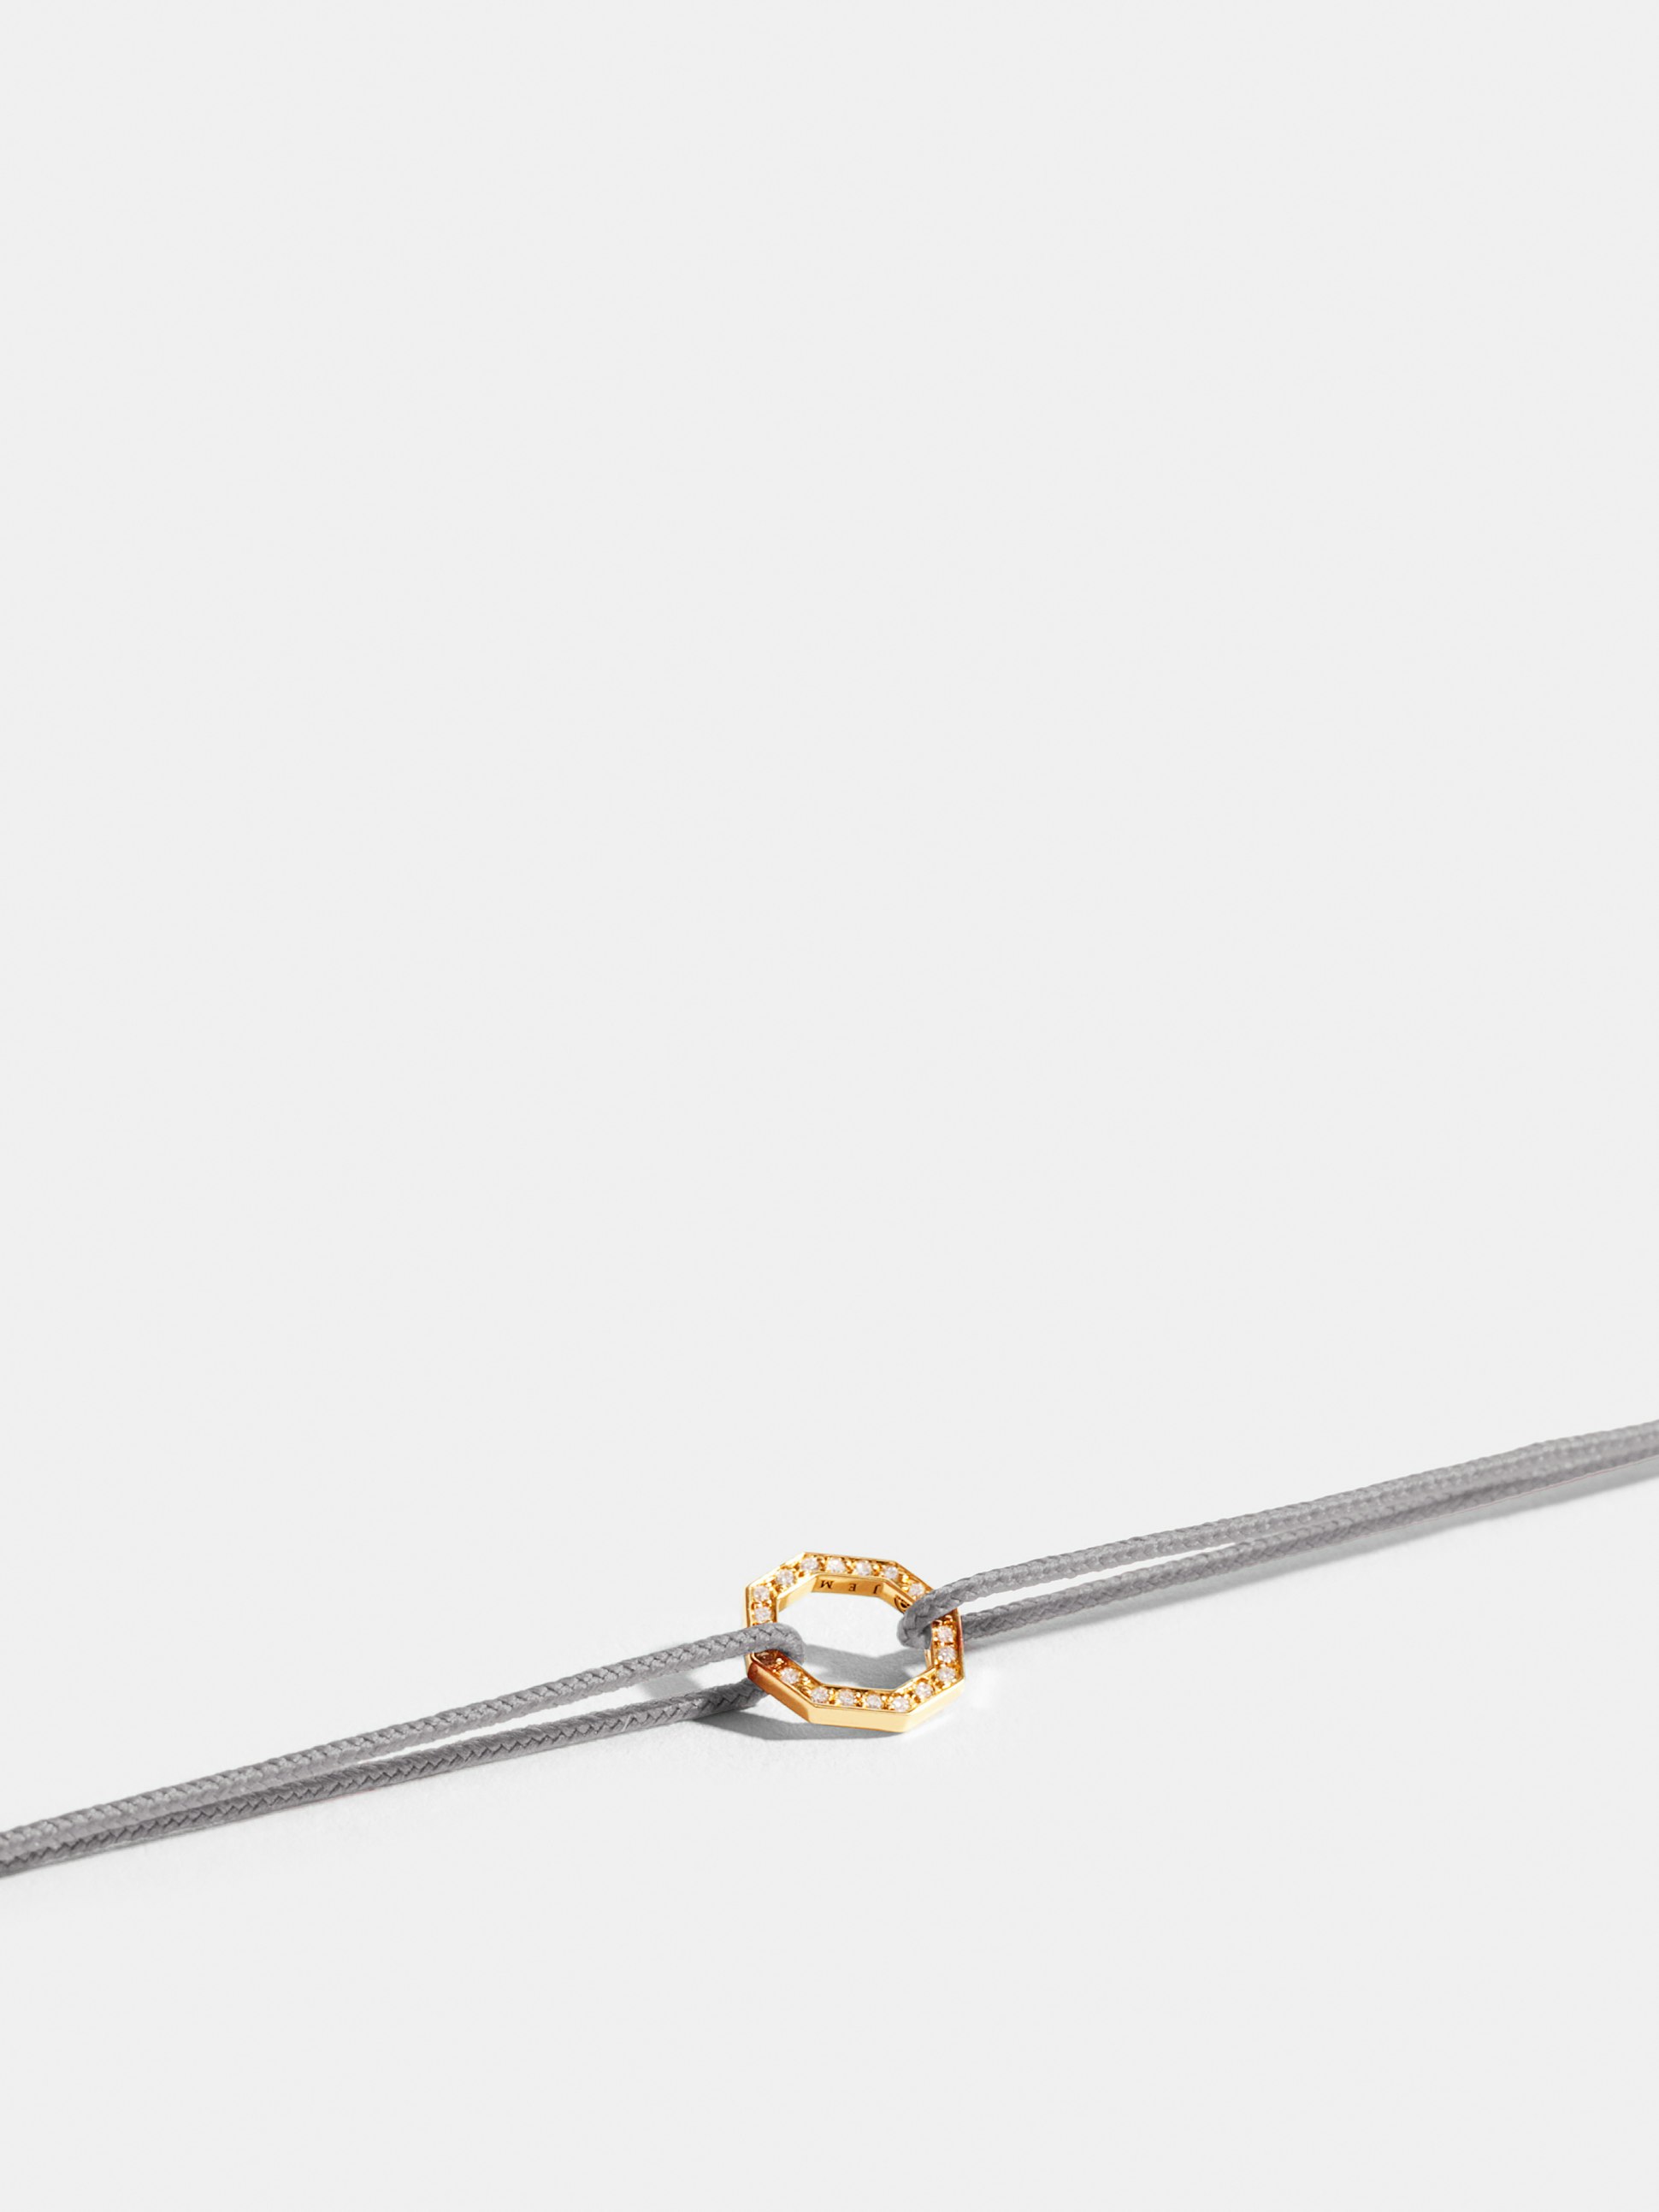 Octogone motif in 18k Fairmined ethical yellow gold, paved with lab-grown diamonds, on an pearl grey cord.